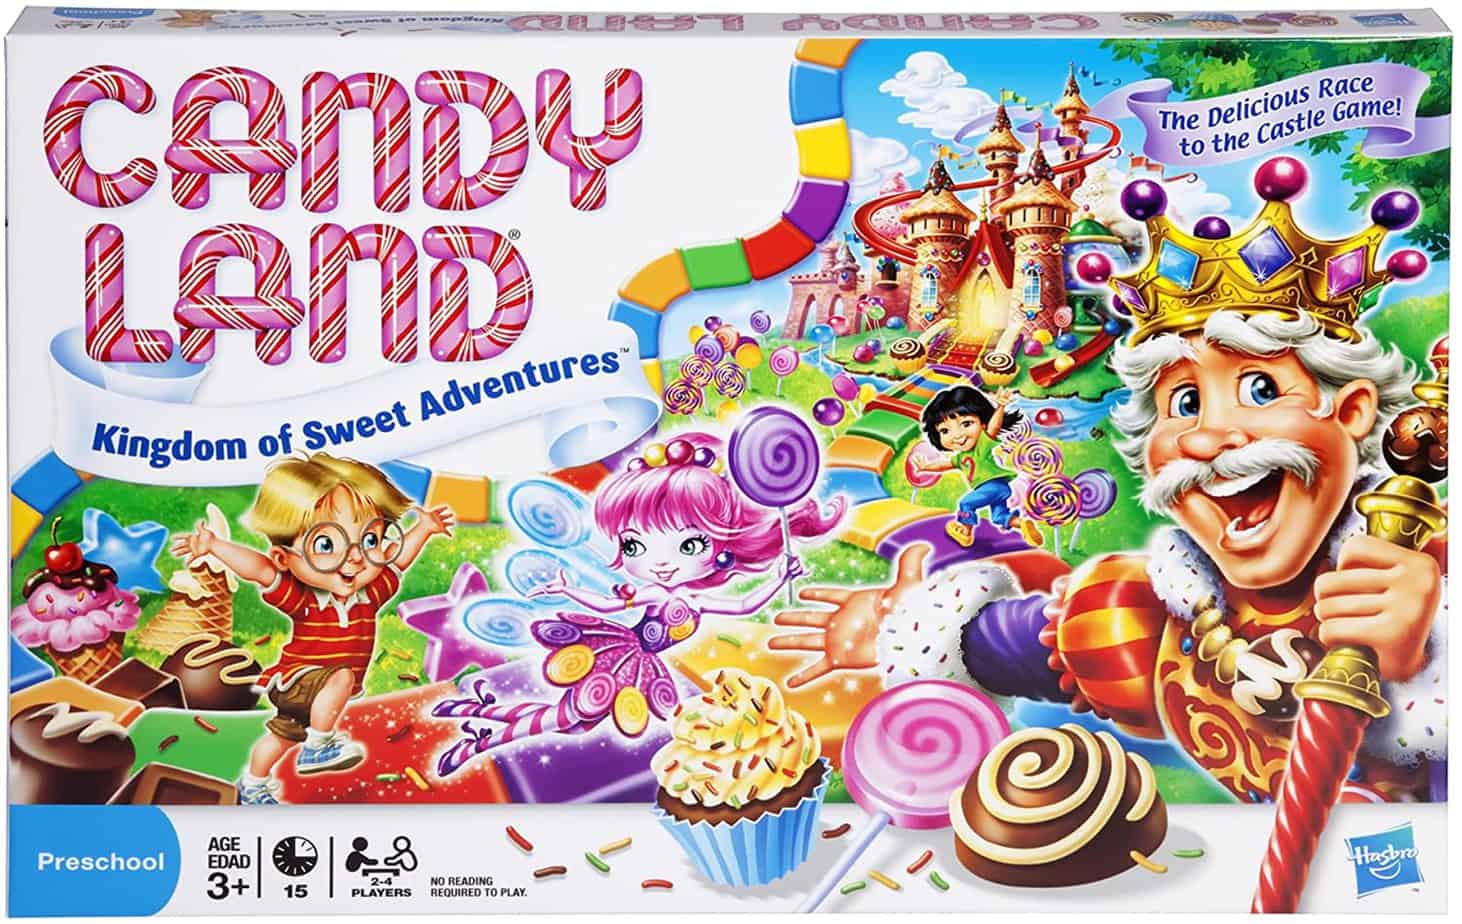 How To Play Candyland (3 minute guide)